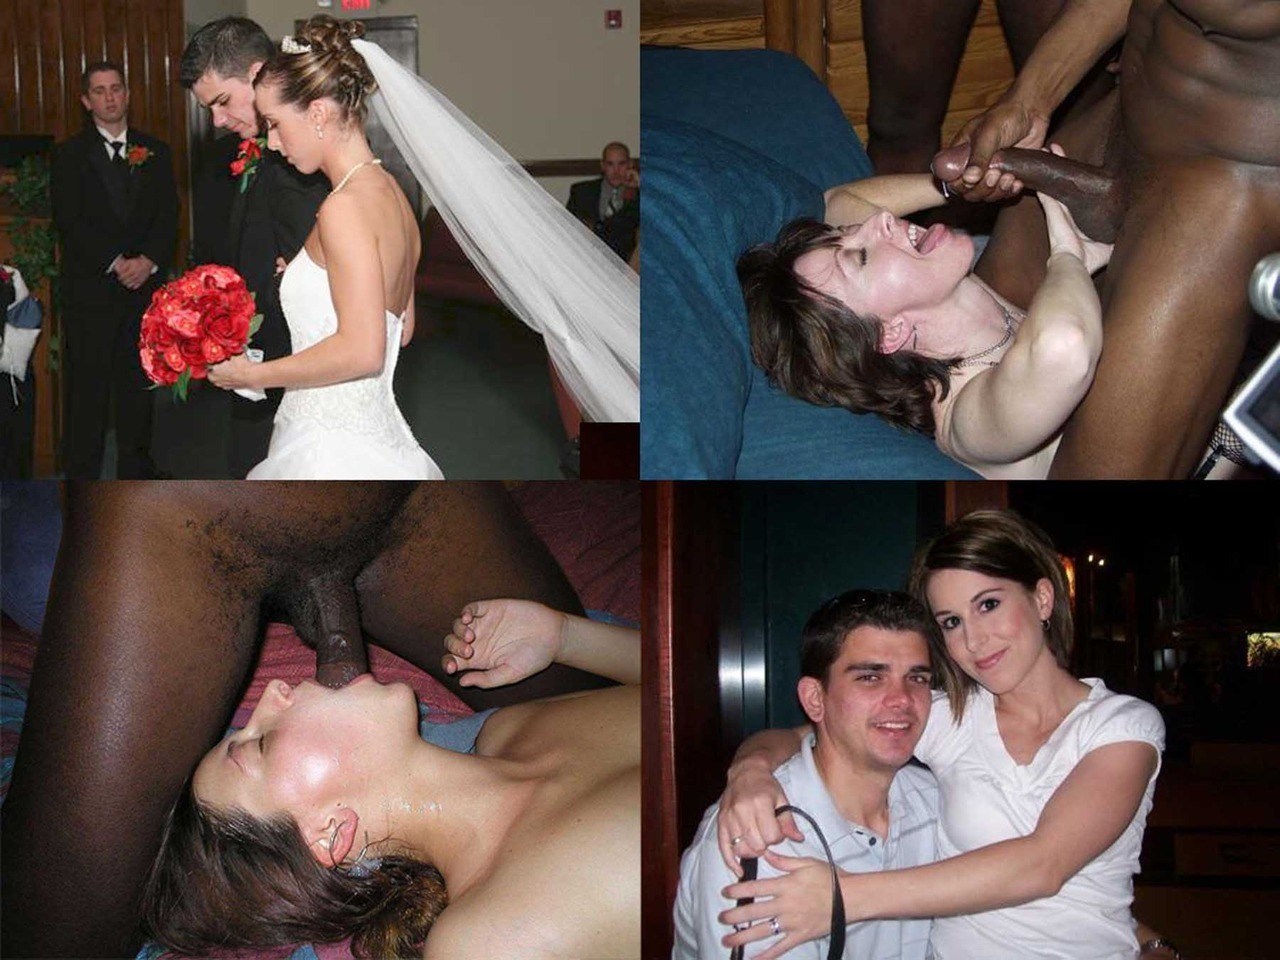 Sex with his wife on their wedding night (49 photos) image